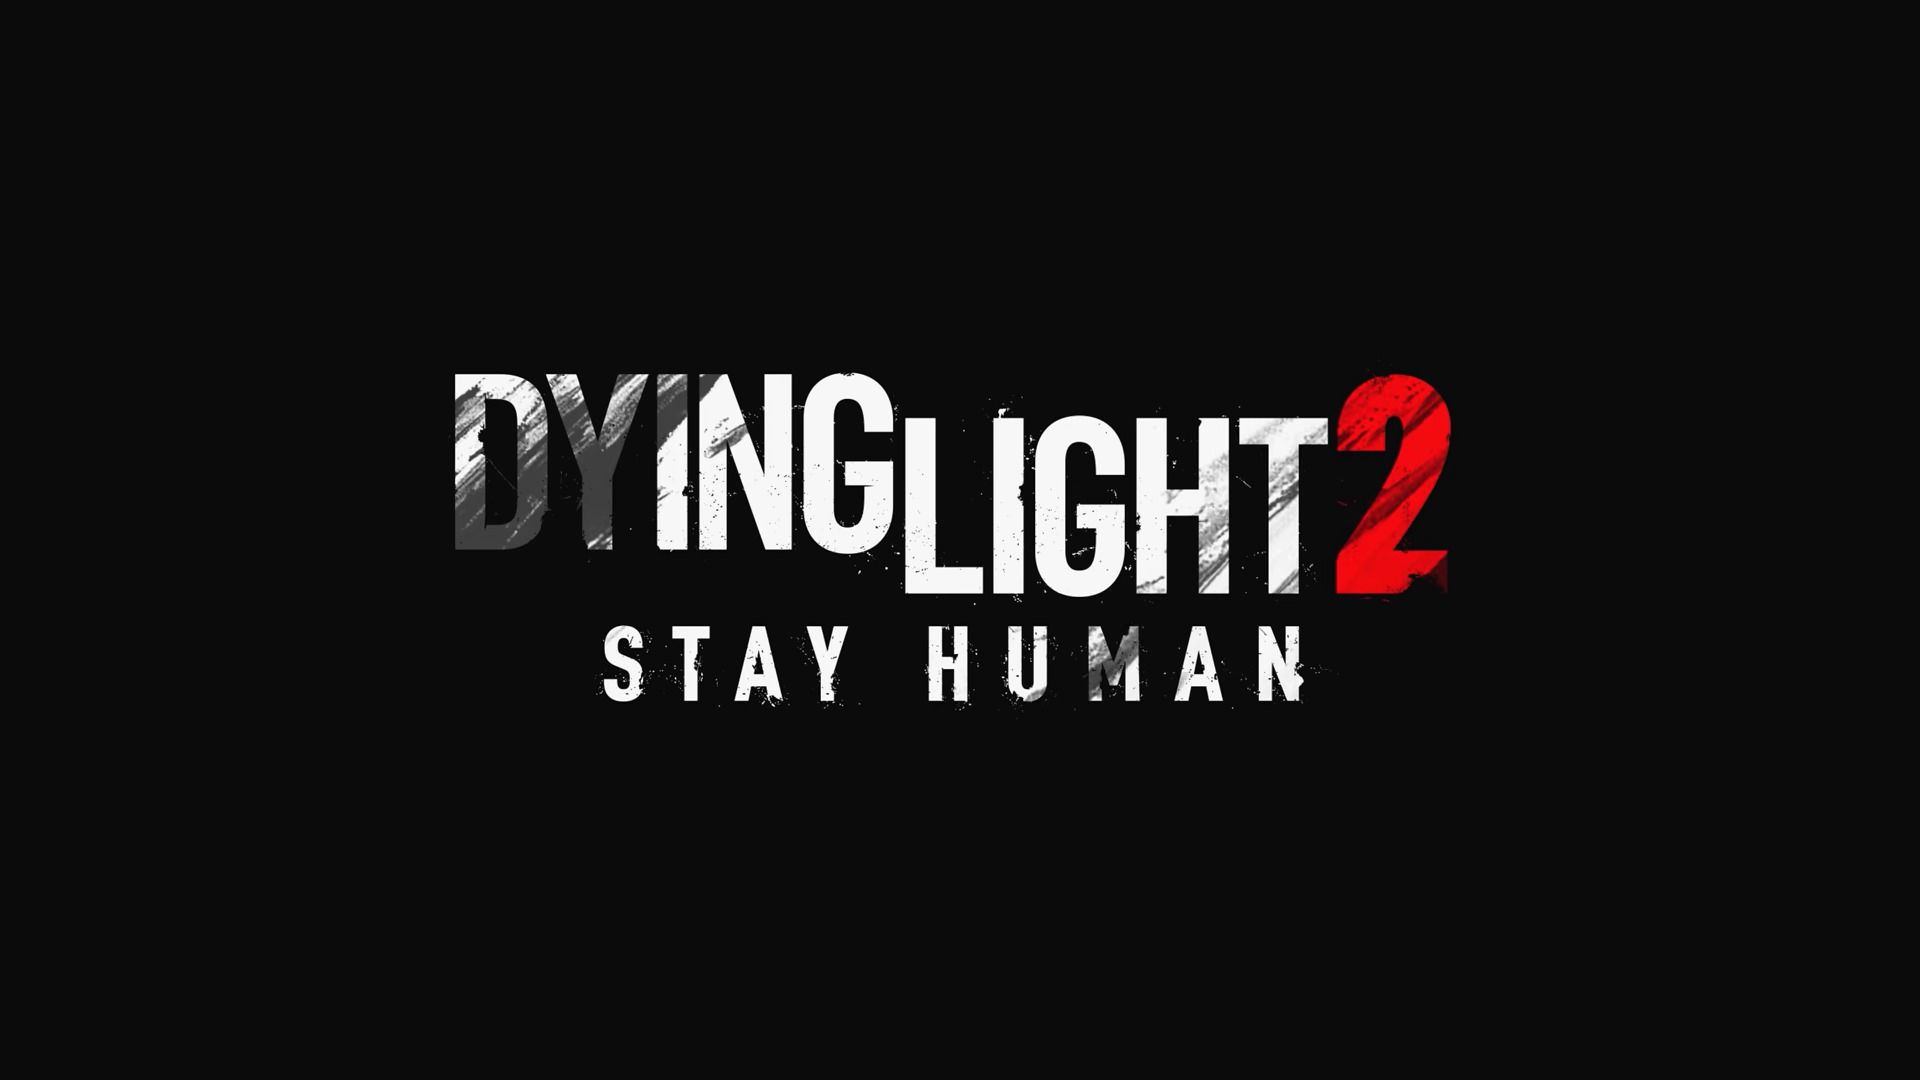 Dying Light 2 will NOT have Nintendo Switch or Cross-Play support